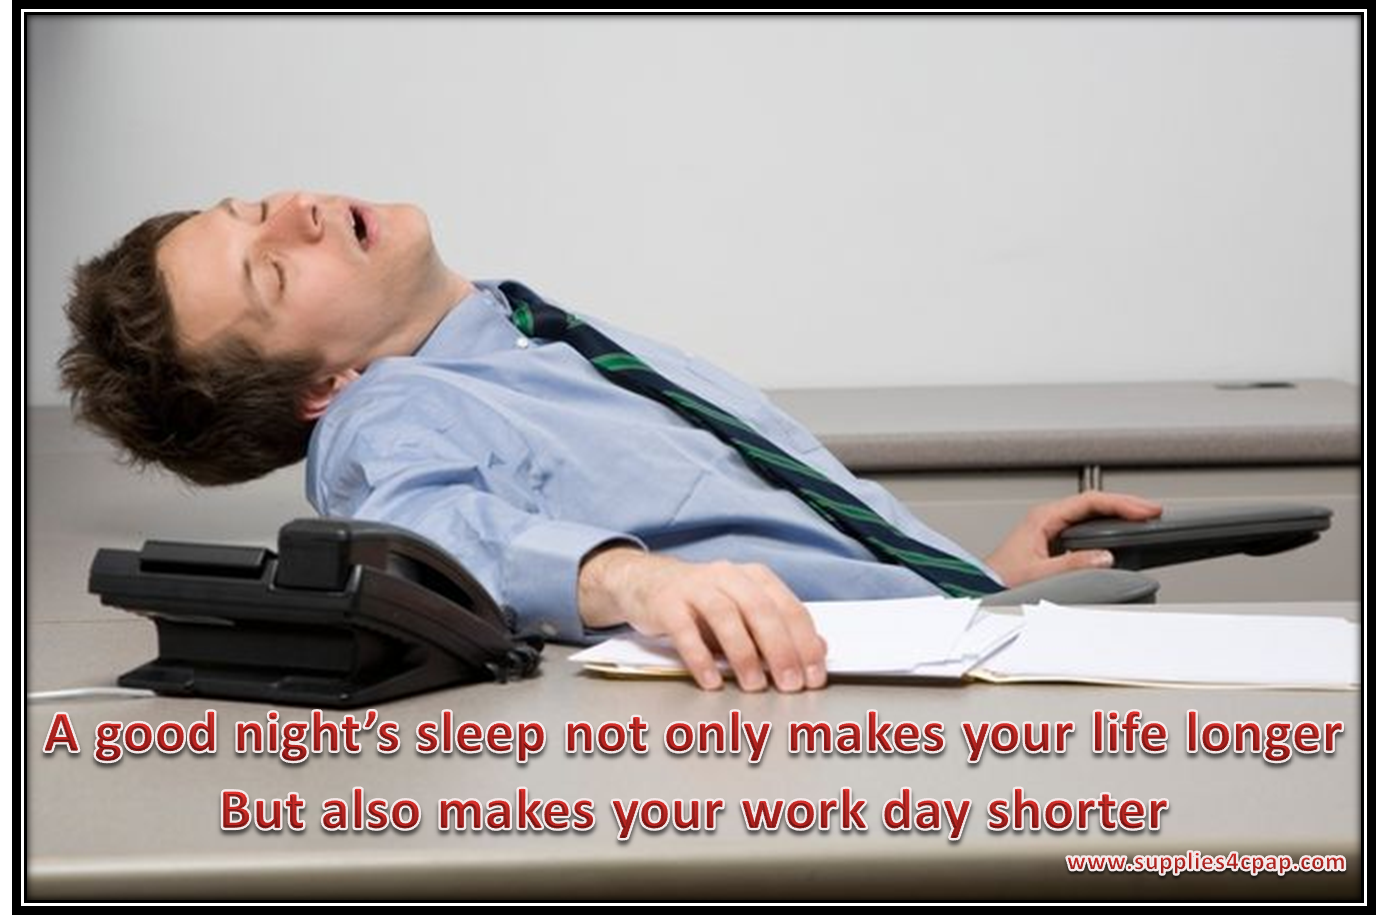 A good night’s sleep not only makes your life longer But also makes your work day shorter